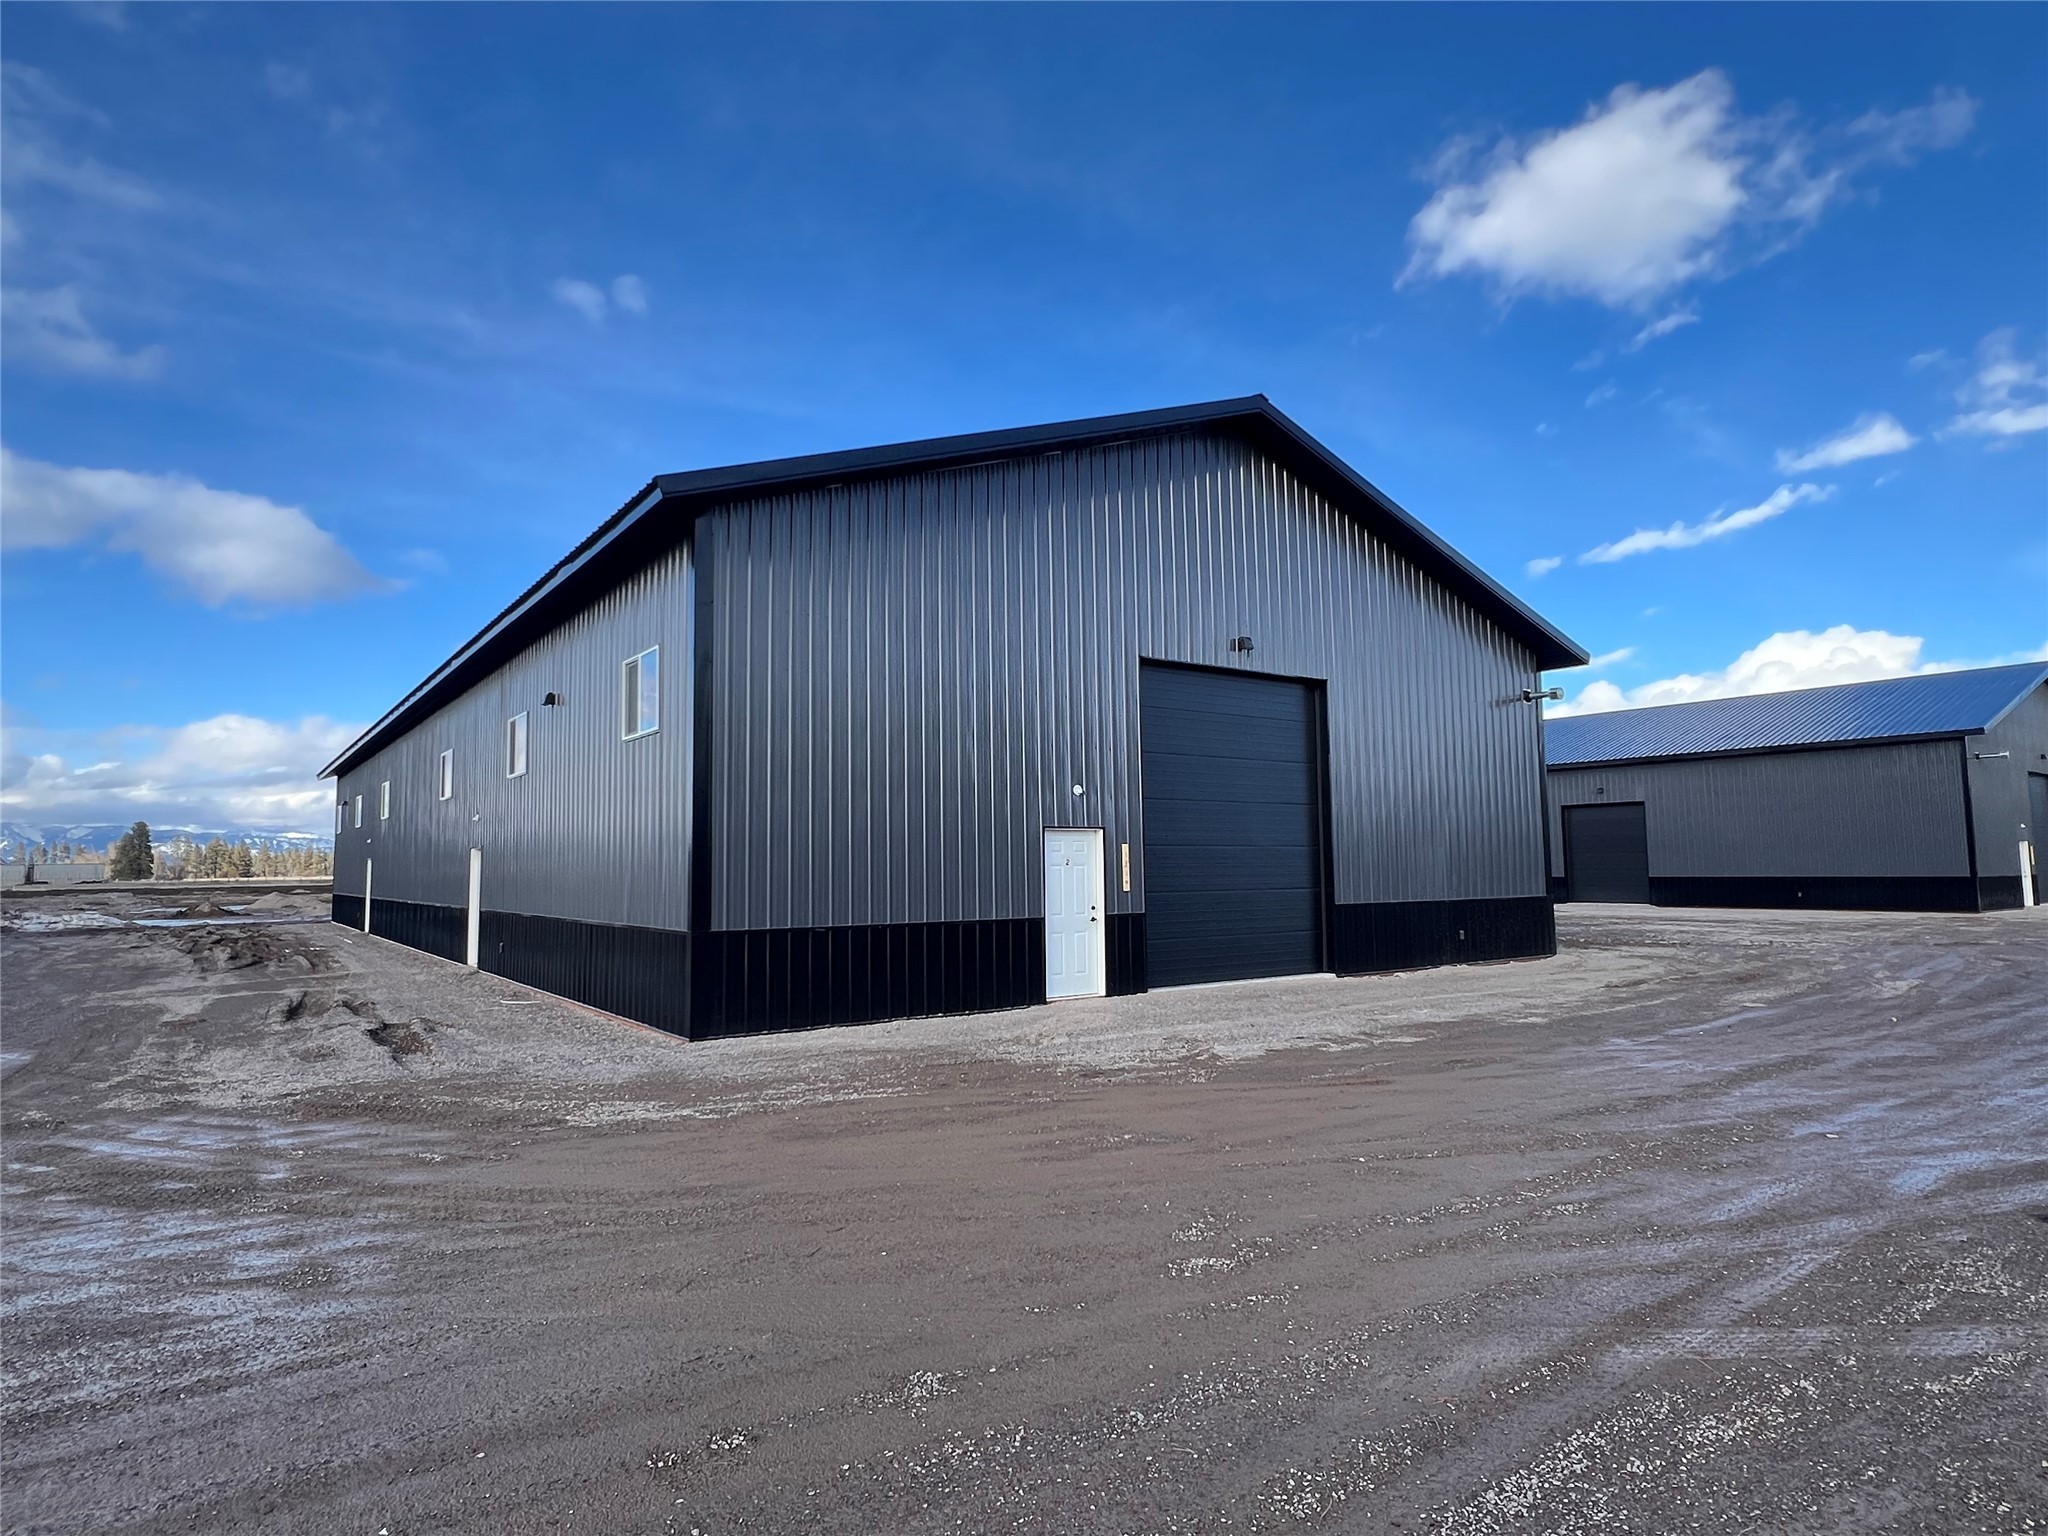 3000 Square Foot (50x60) shop/warehouse space available for lease.  This new development, with access off of Highway 2E and E Reserve, has 6000 SF buildings available as a whole or half building.  383 Unit 2 is a half building with bathroom, two man doors, and two overhead doors (12x14 and 10x12).  The building has metal walls and ceiling interior finishes, 16' walls, gas heater, evergreen water, private sewer, and 200 Amp service.  The development is paved, and set up for tractor trailer circulation and deliveries.  Call Zac Andrews at 406-250-6160, or your Real Estate Professional.